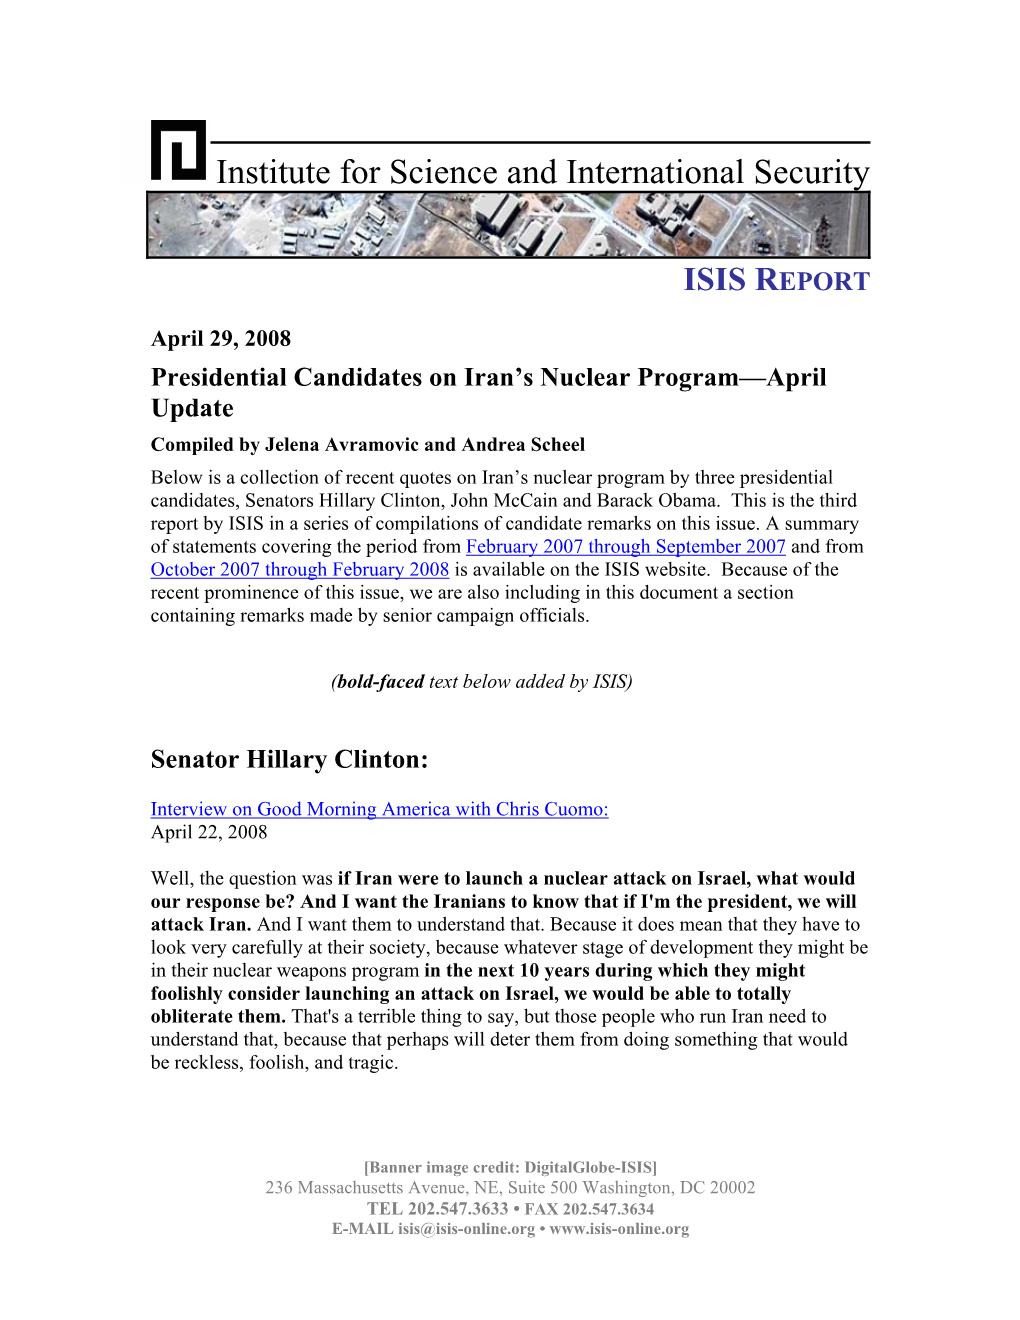 Presidential Candidates on Iran's Nuclear Program